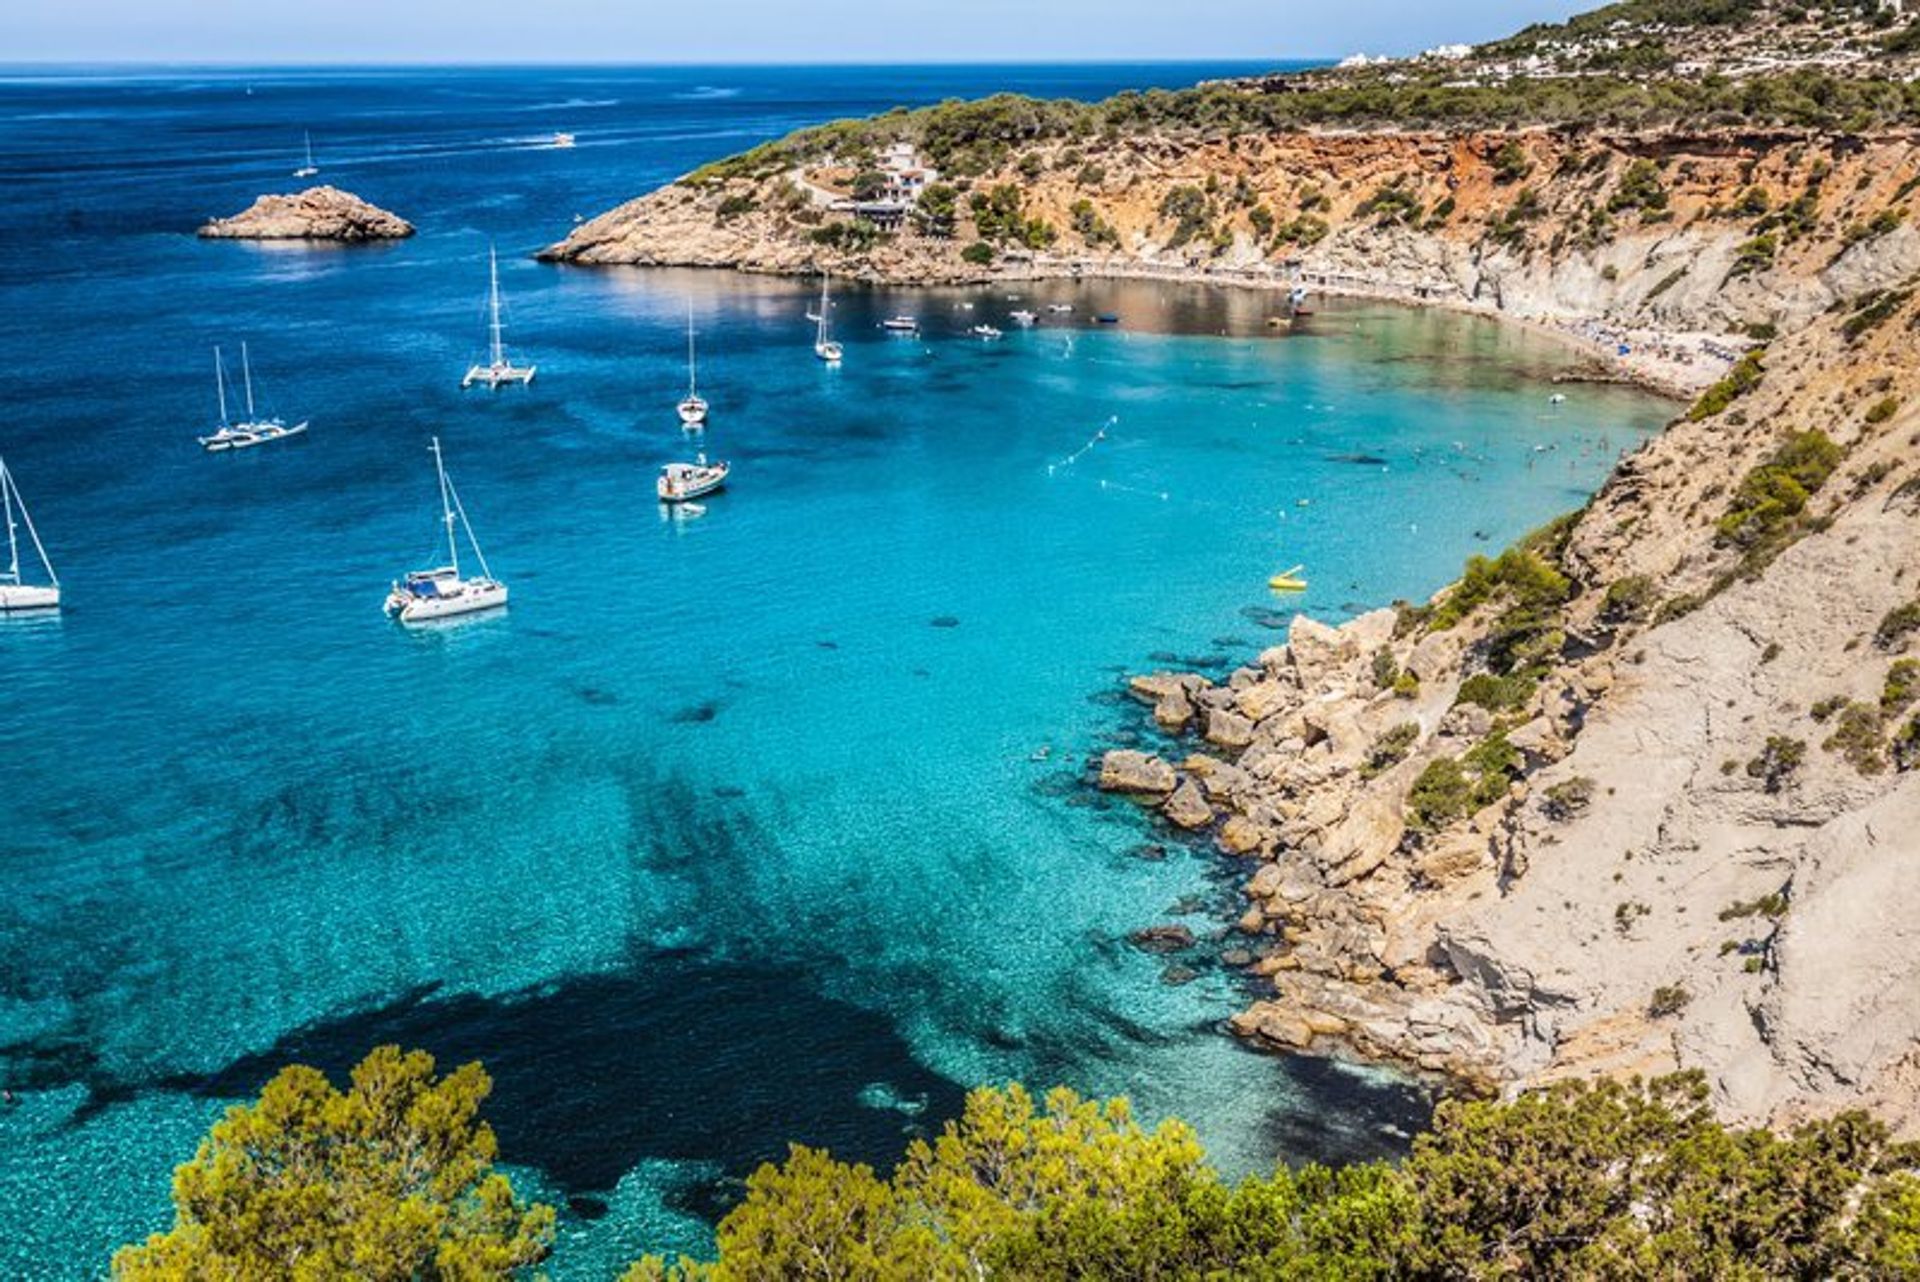 The crystal clear waters of the southwestern coast of Ibiza, with its scattered islets